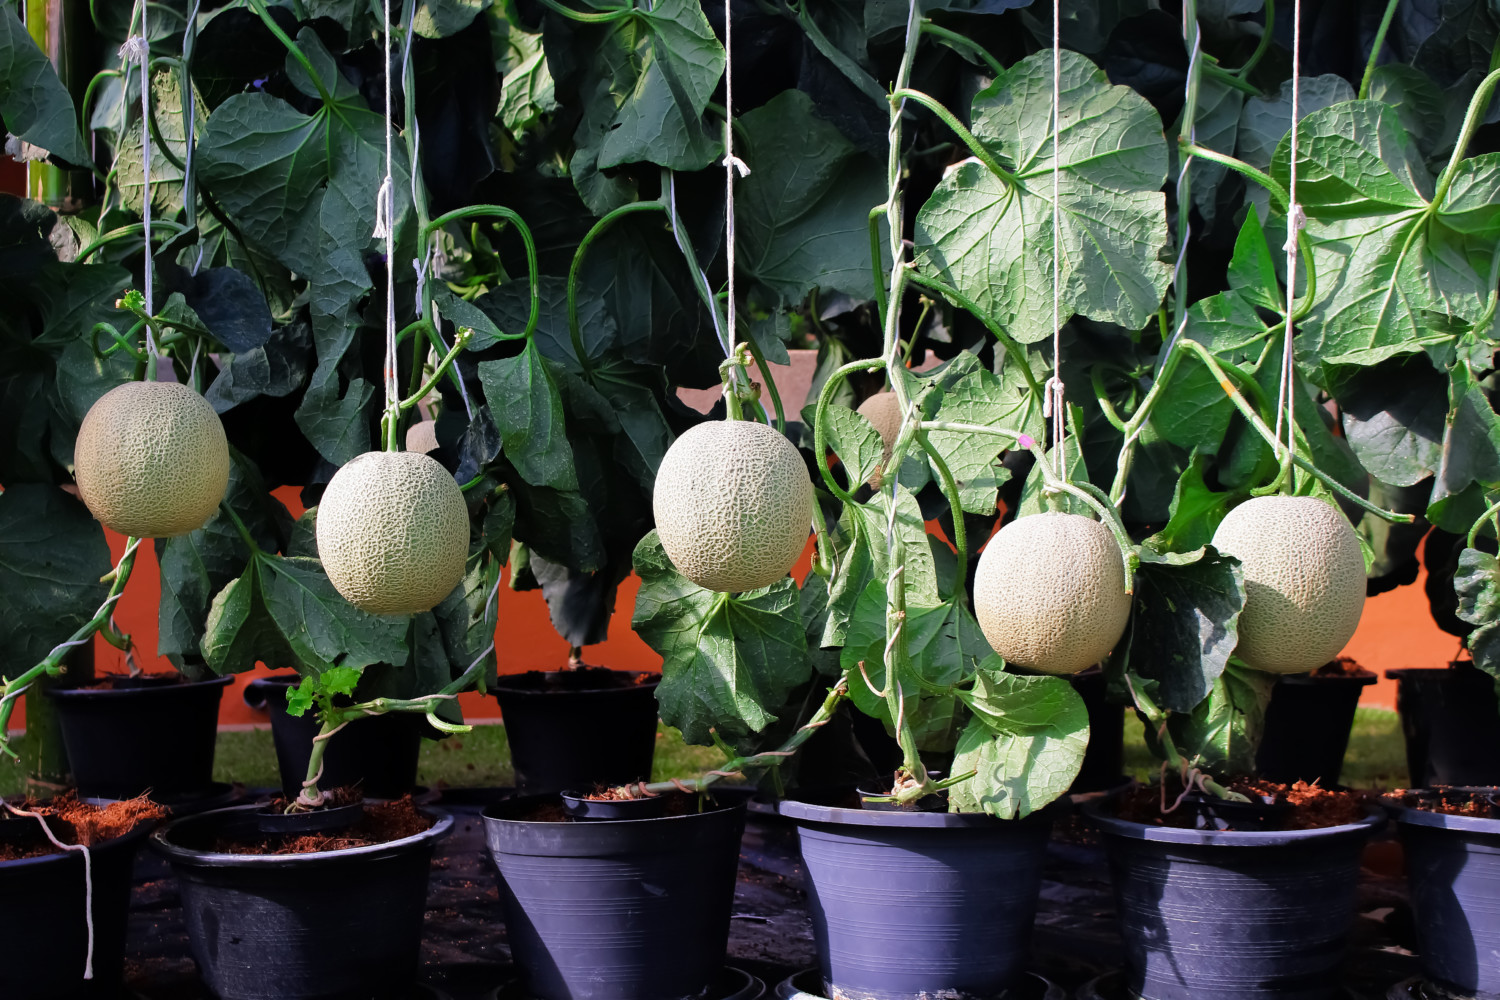 Cantaloupes growing in pots